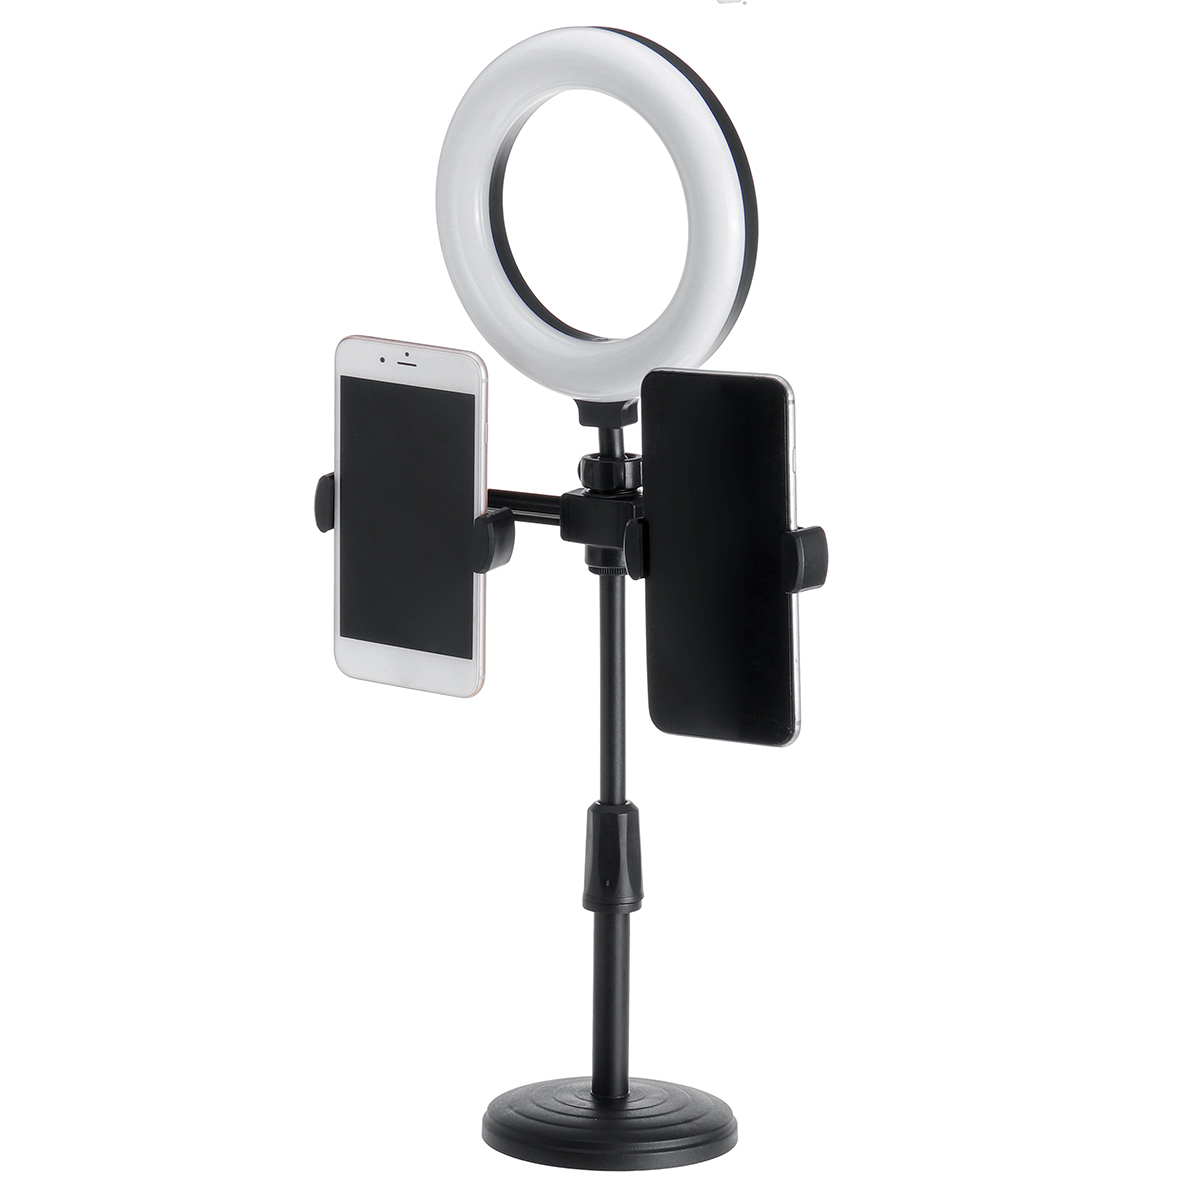 916-cm-3-Modes-of-Color-Temperature-Color-Ring-Fill-Light-with-Dual-Mobile-Phone-Holder-YouTube-Tikt-1881126-6